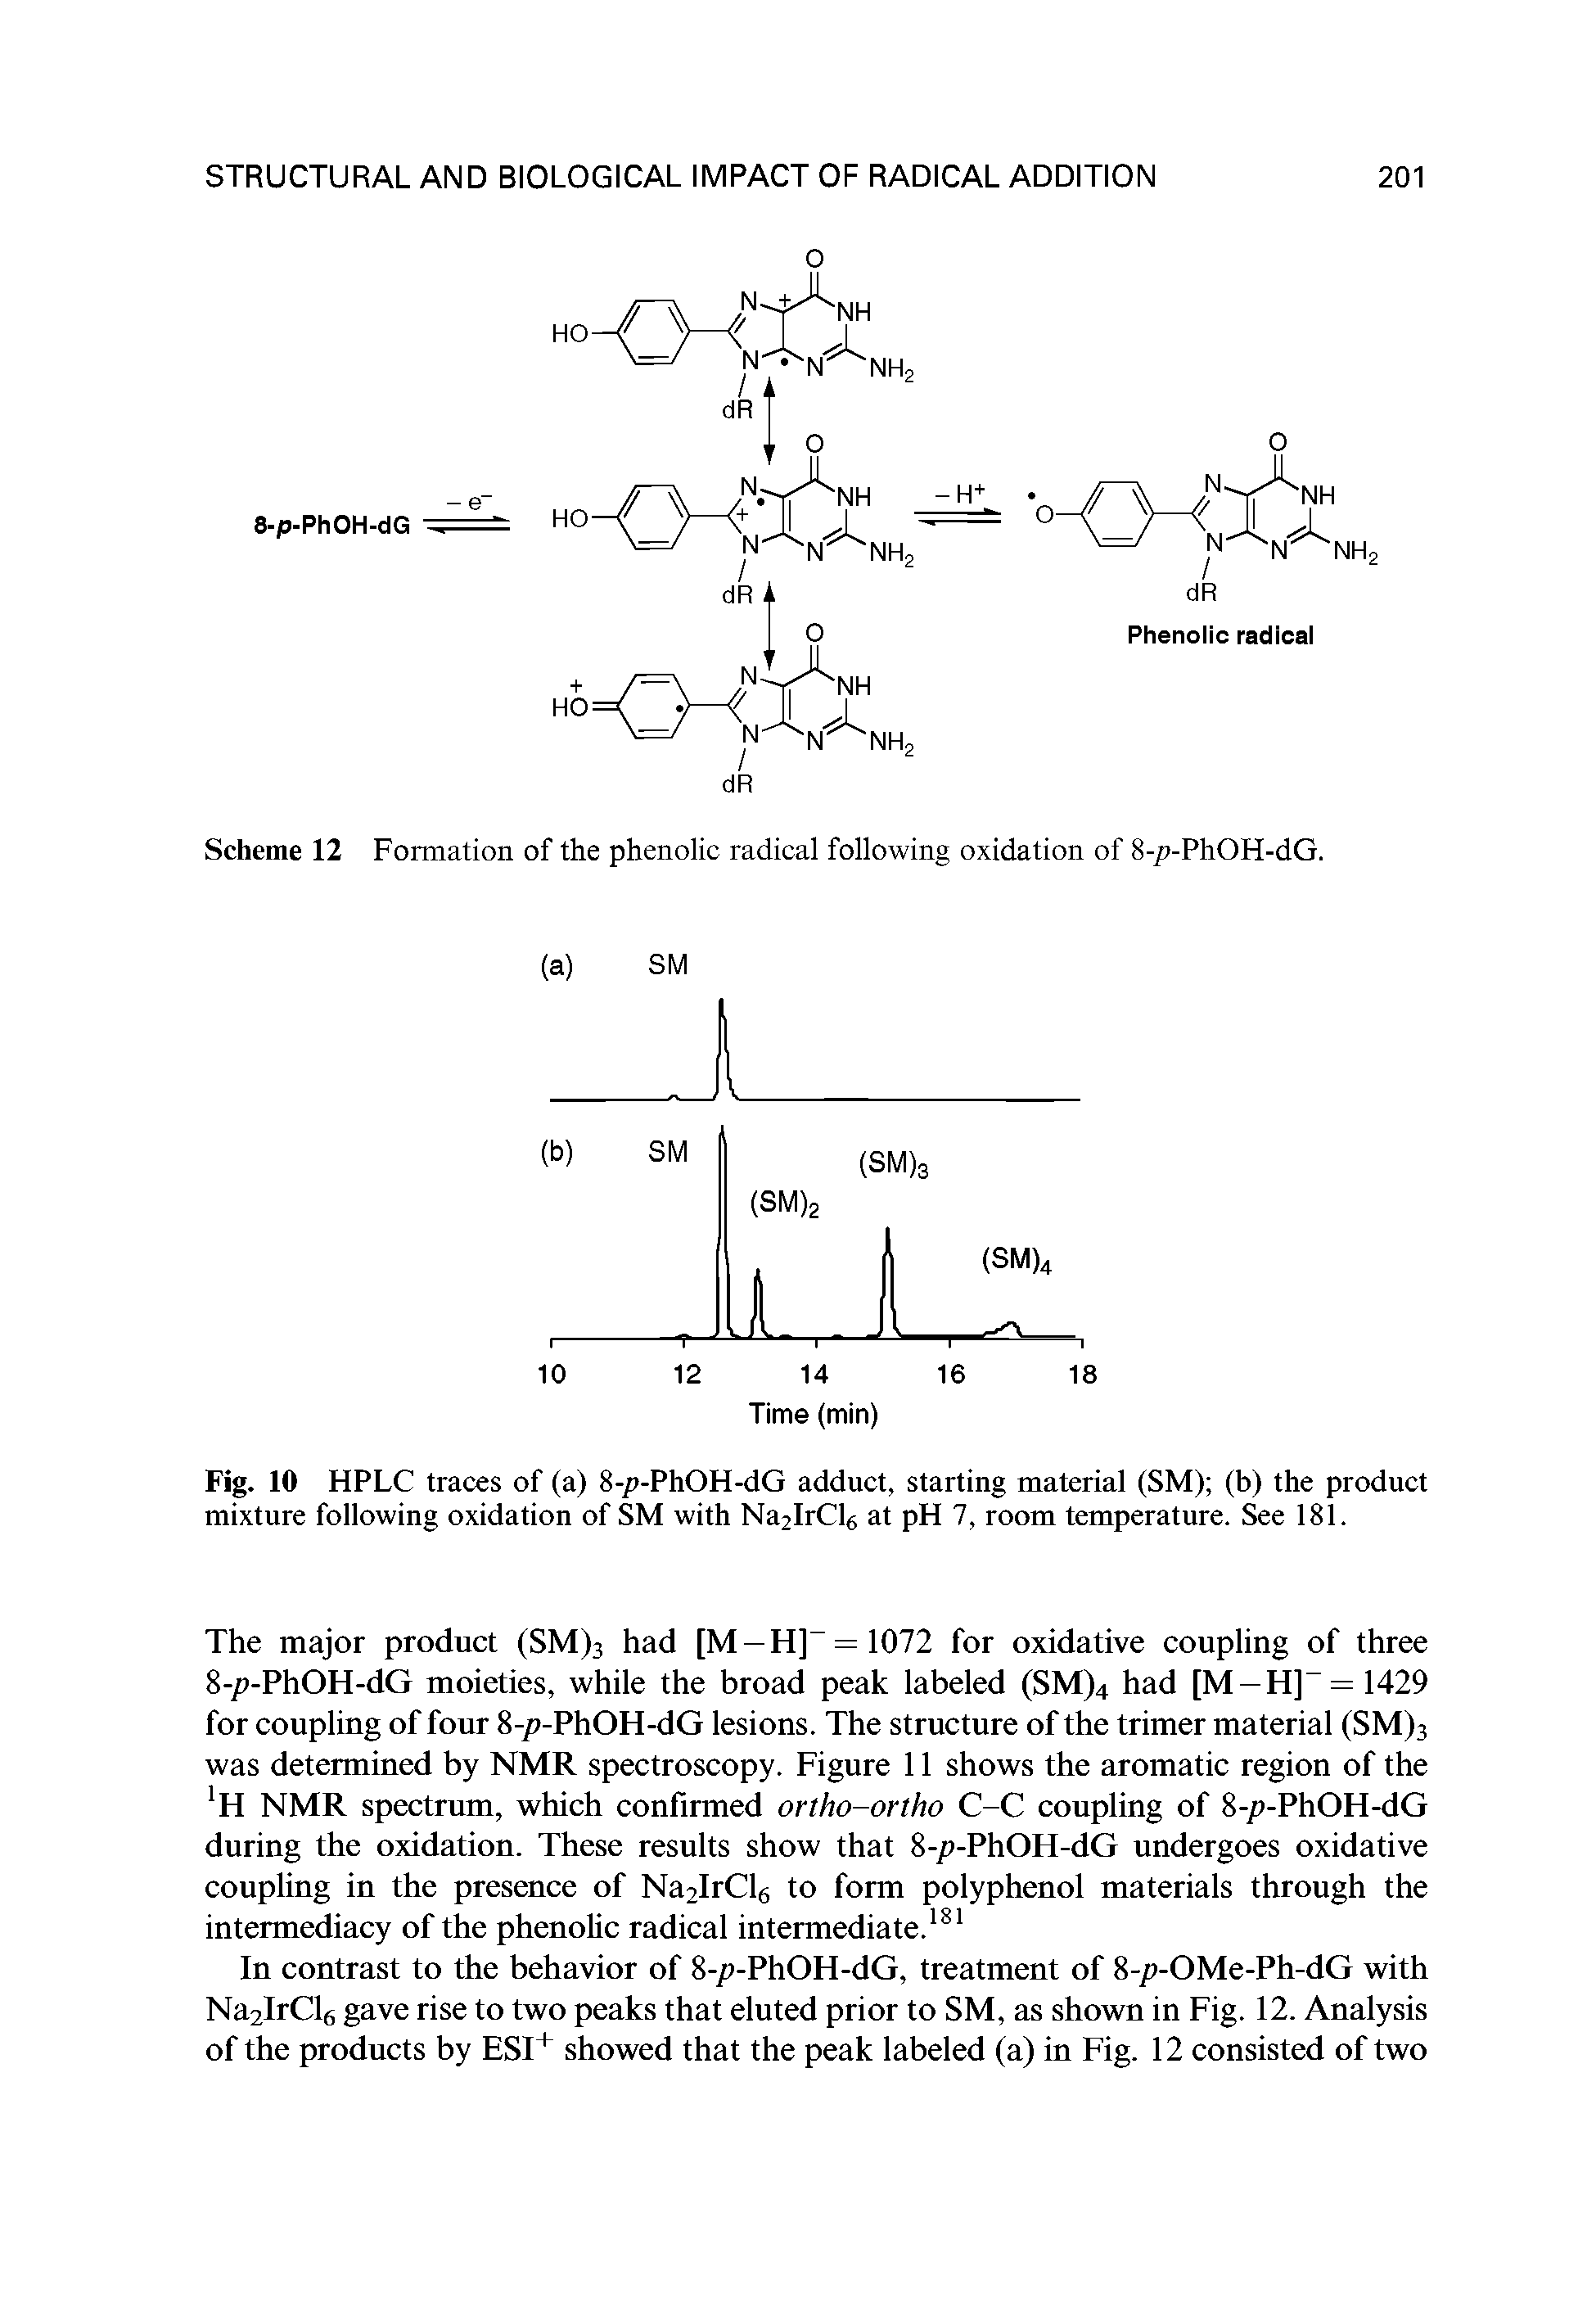 Scheme 12 Formation of the phenolic radical following oxidation of 8-p-PhOH-dG.